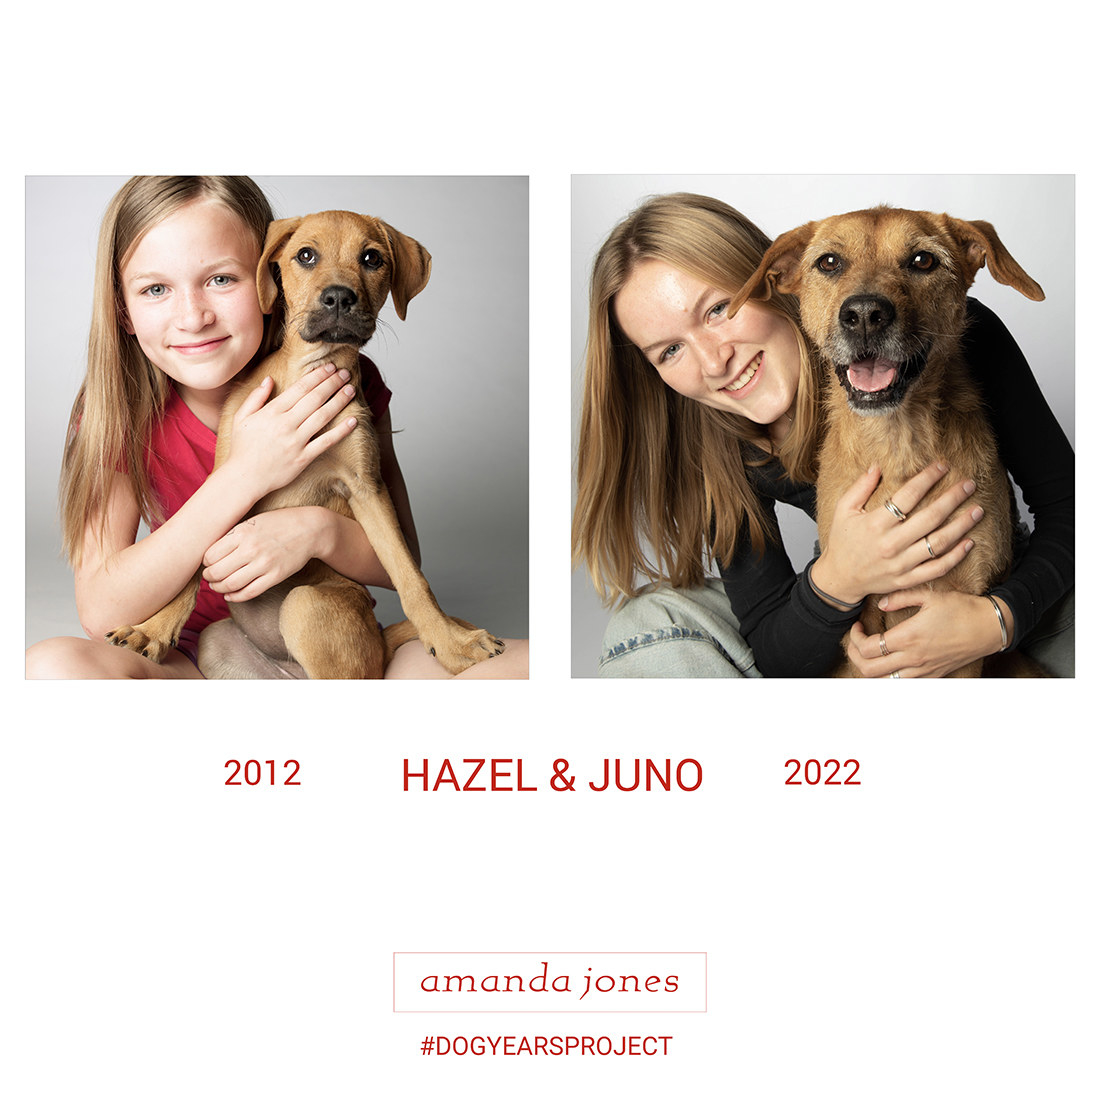 image of a woman with her dog taken years apart from 2012 and again in 2022